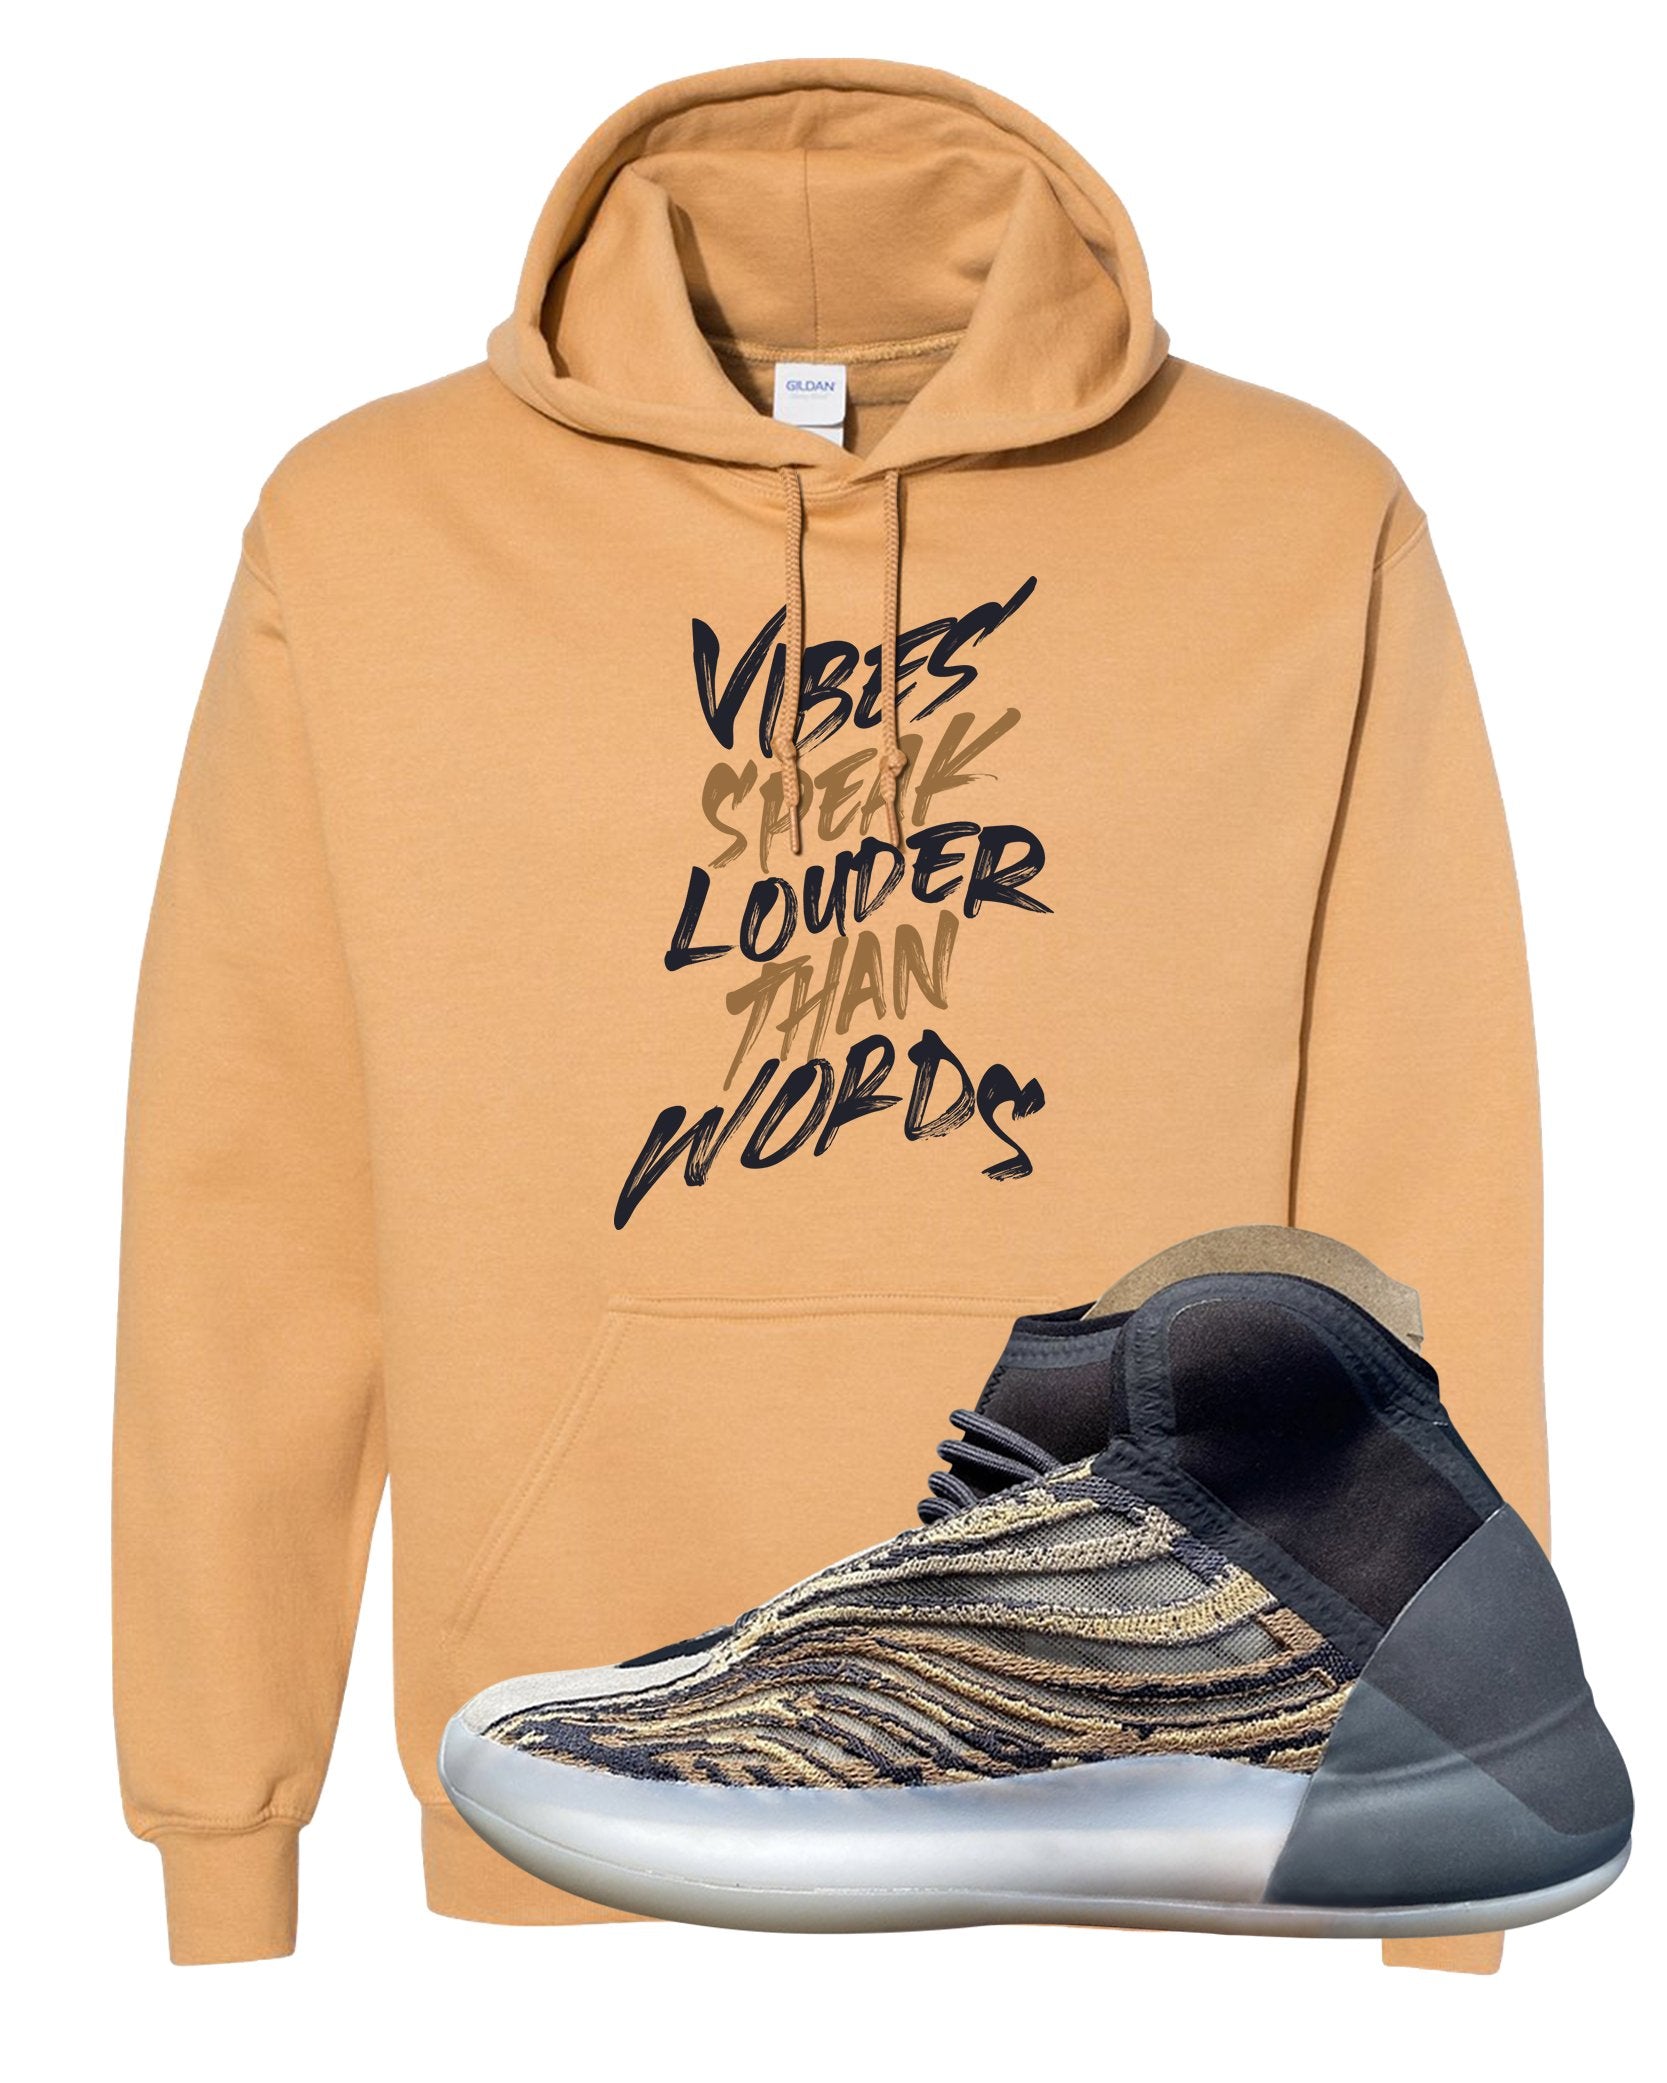 Amber Tint Quantums Hoodie | Vibes Speak Louder Than Words, Old Gold